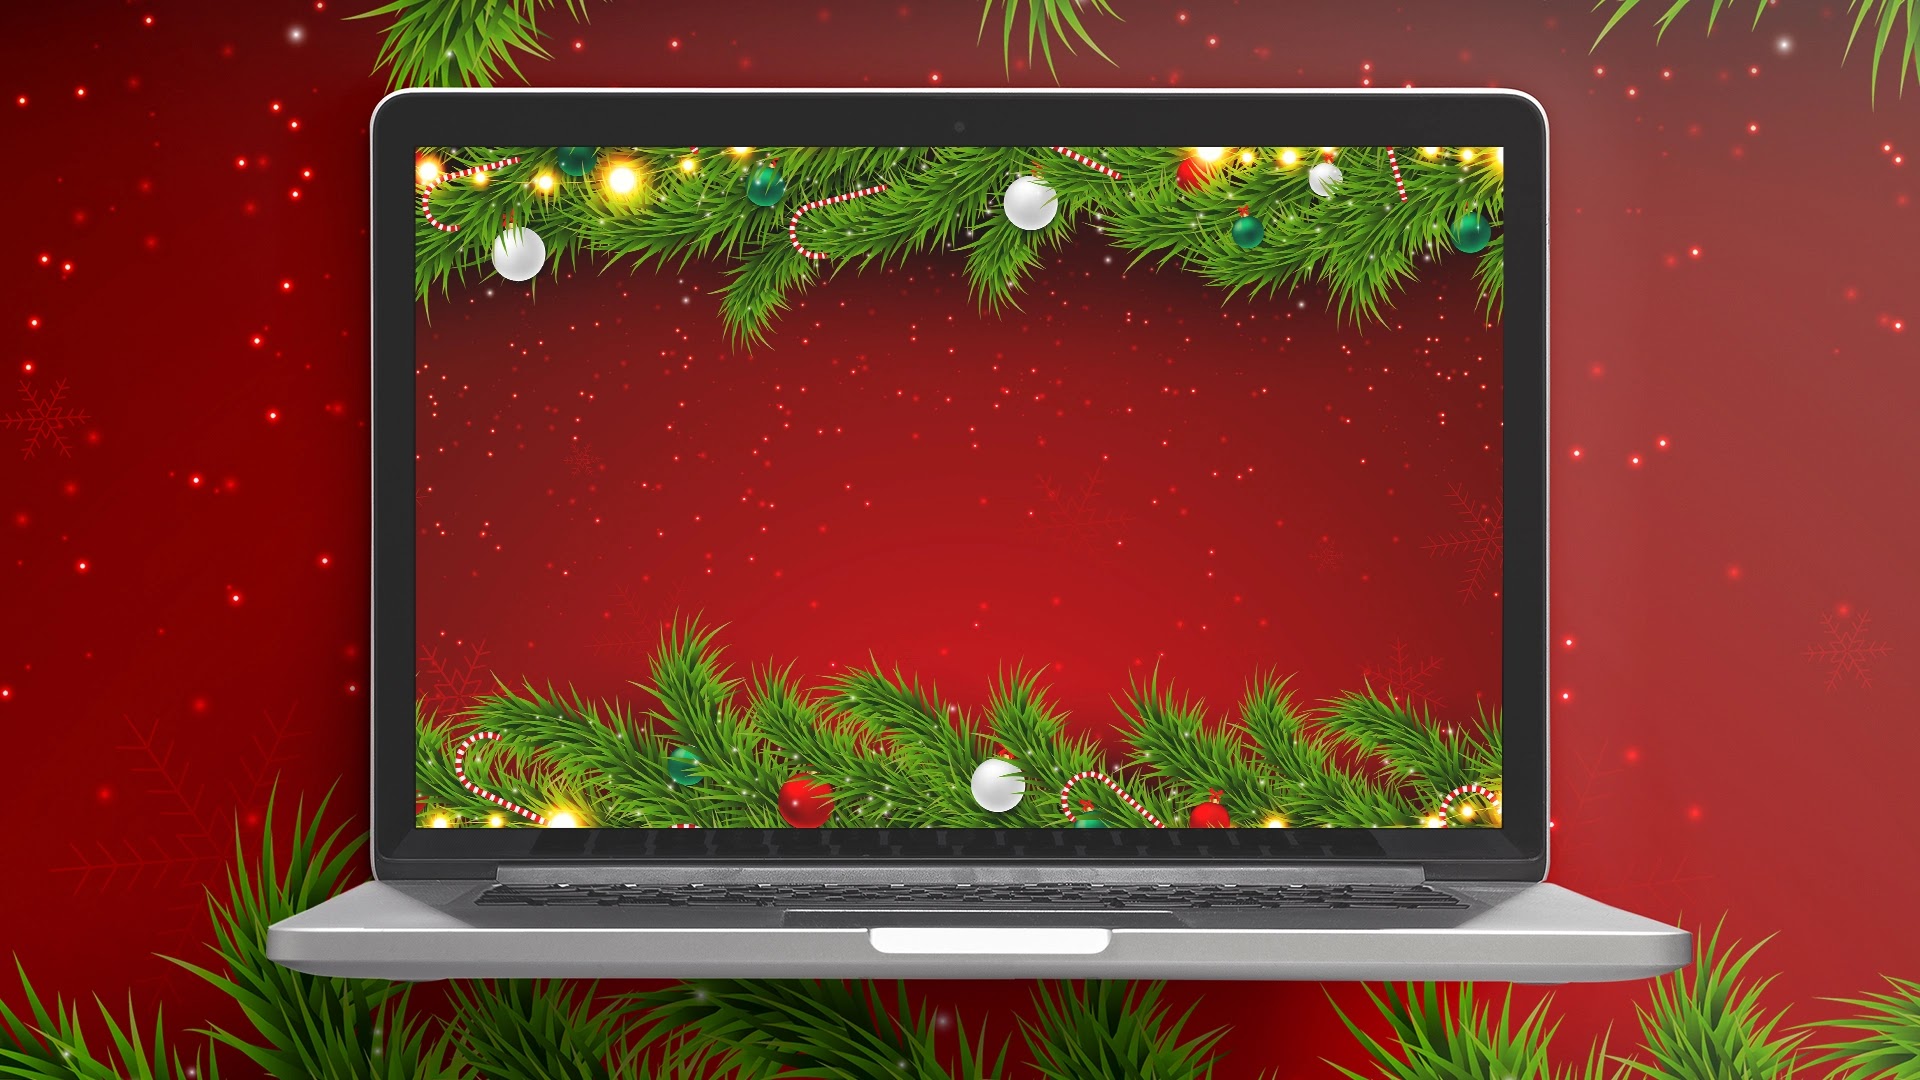 classic Christmas wallpaper for pc